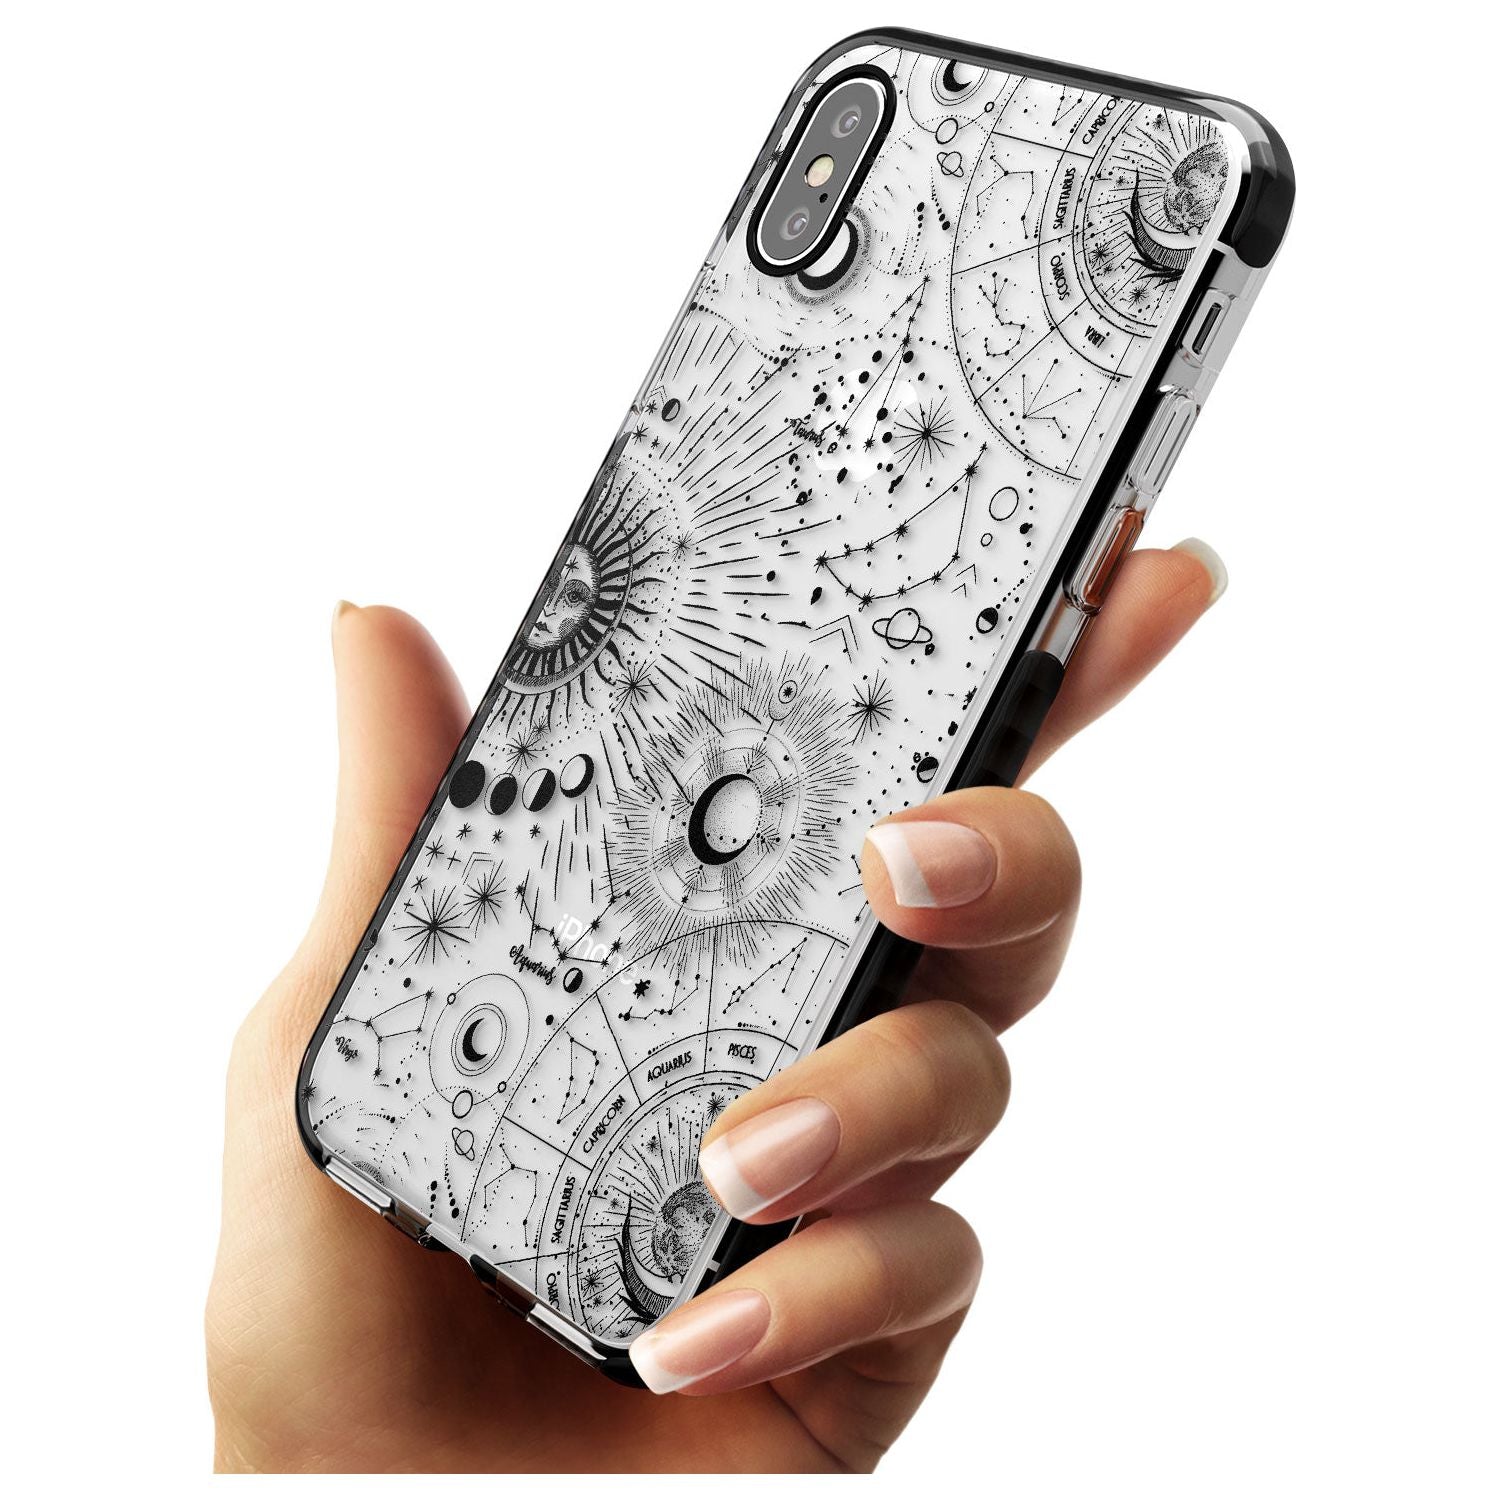 Suns & Constellations Astrological Black Impact Phone Case for iPhone X XS Max XR